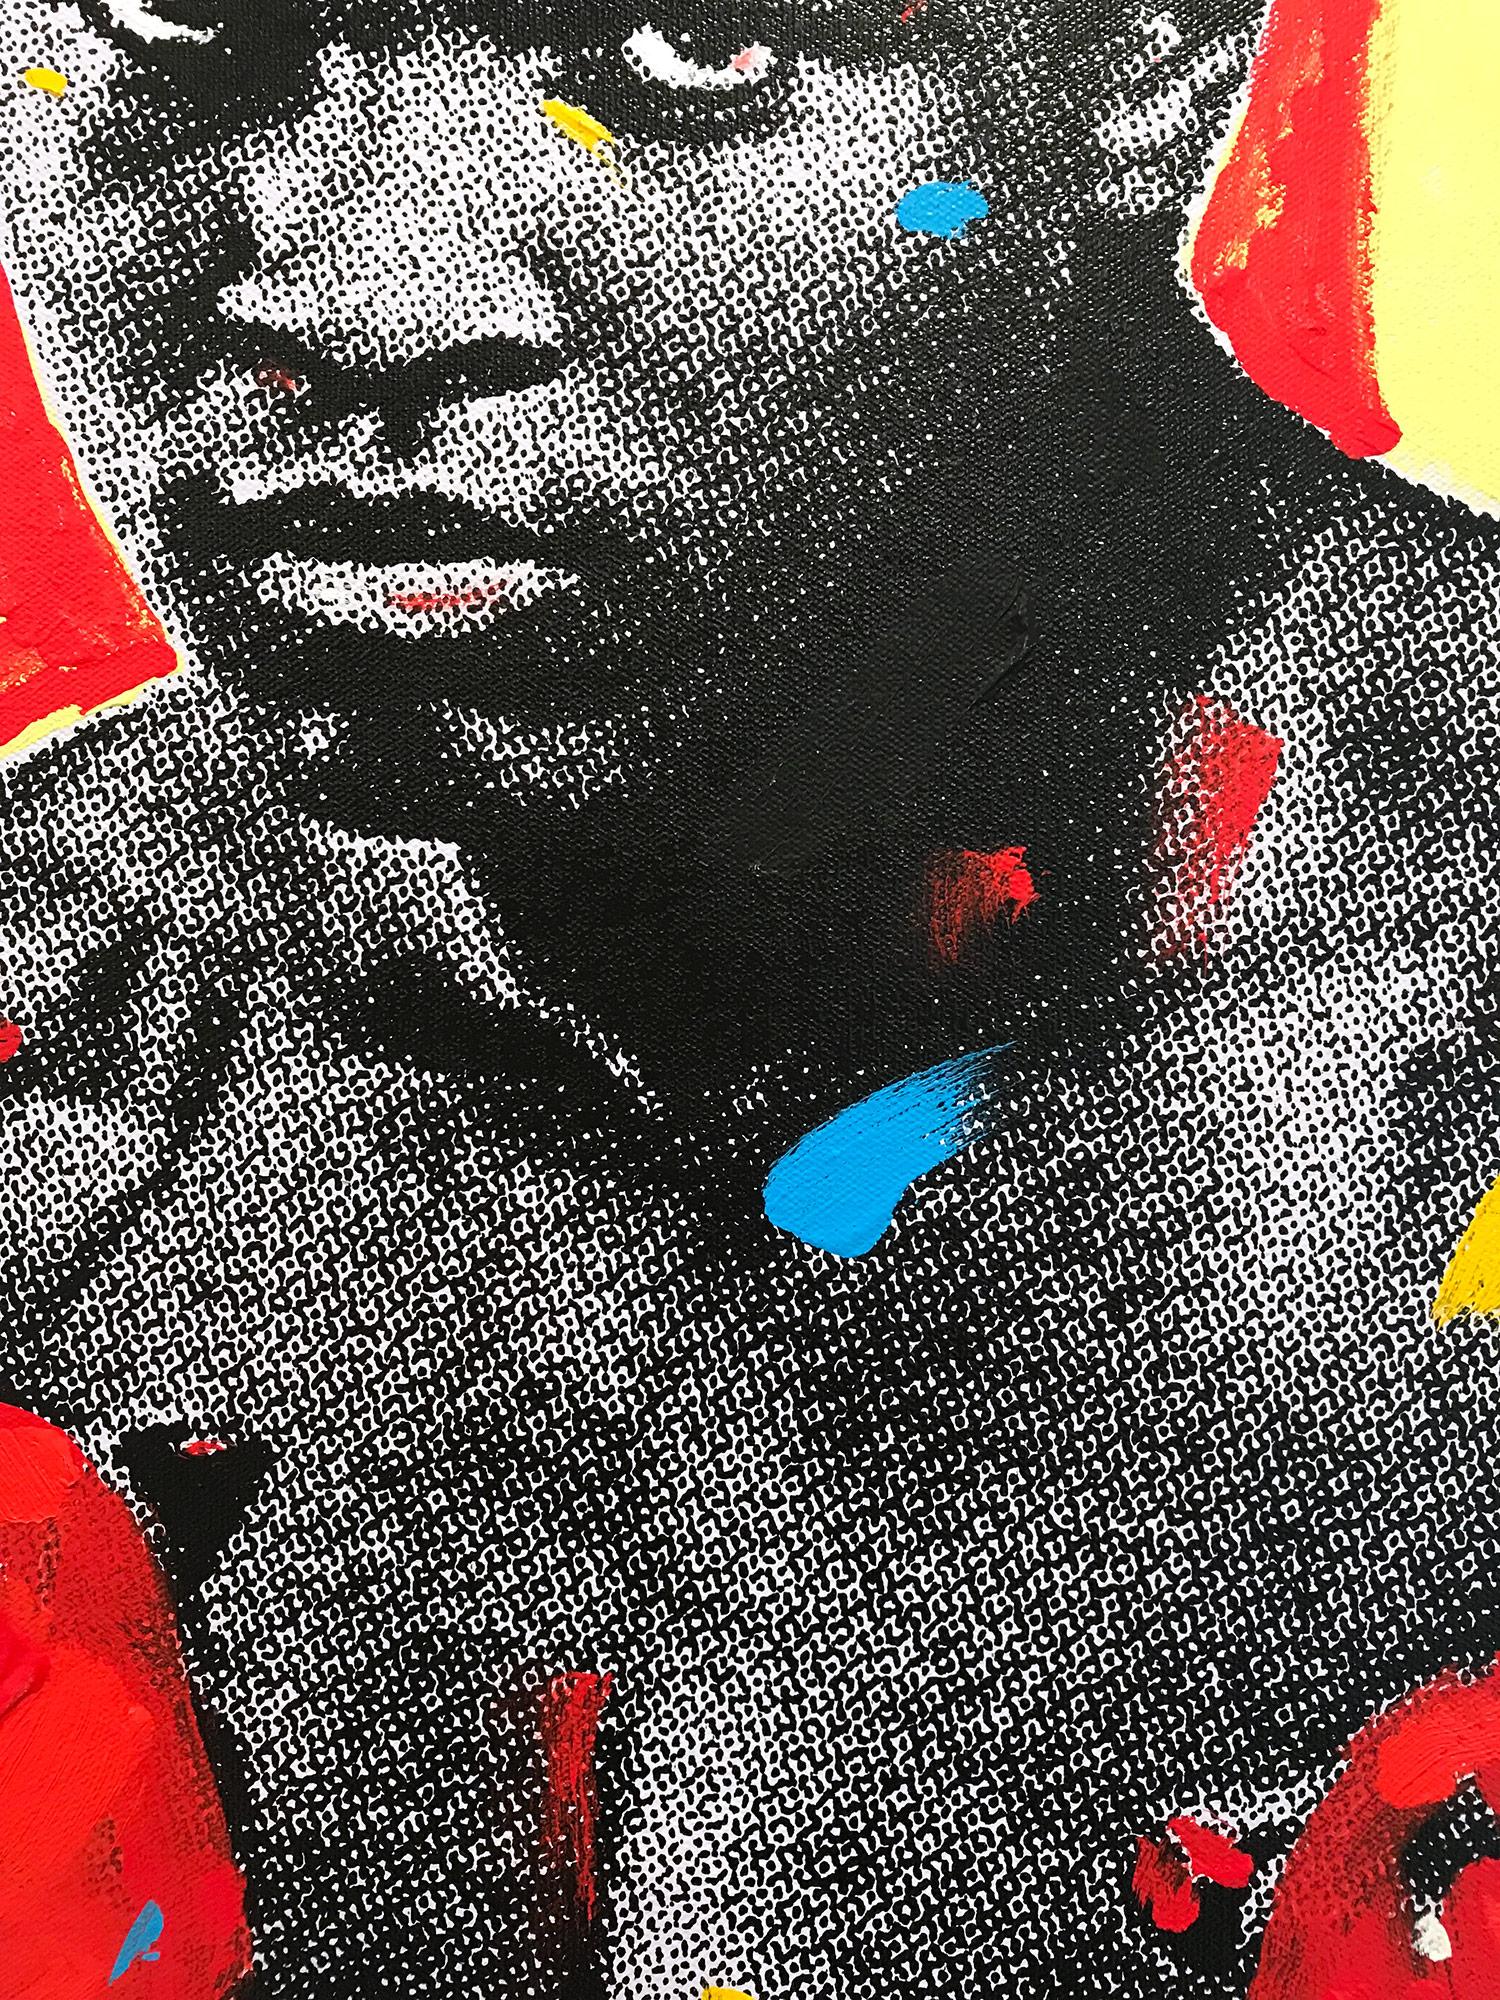 A pop piece depicting Muhammed Ali Cassius Clay. With impasto painting, and quick brushwork we are drawn to the movement, as the artist is able to engage his viewer with contrasting highlights and shadow. Done with Silkscreen in artist studio with